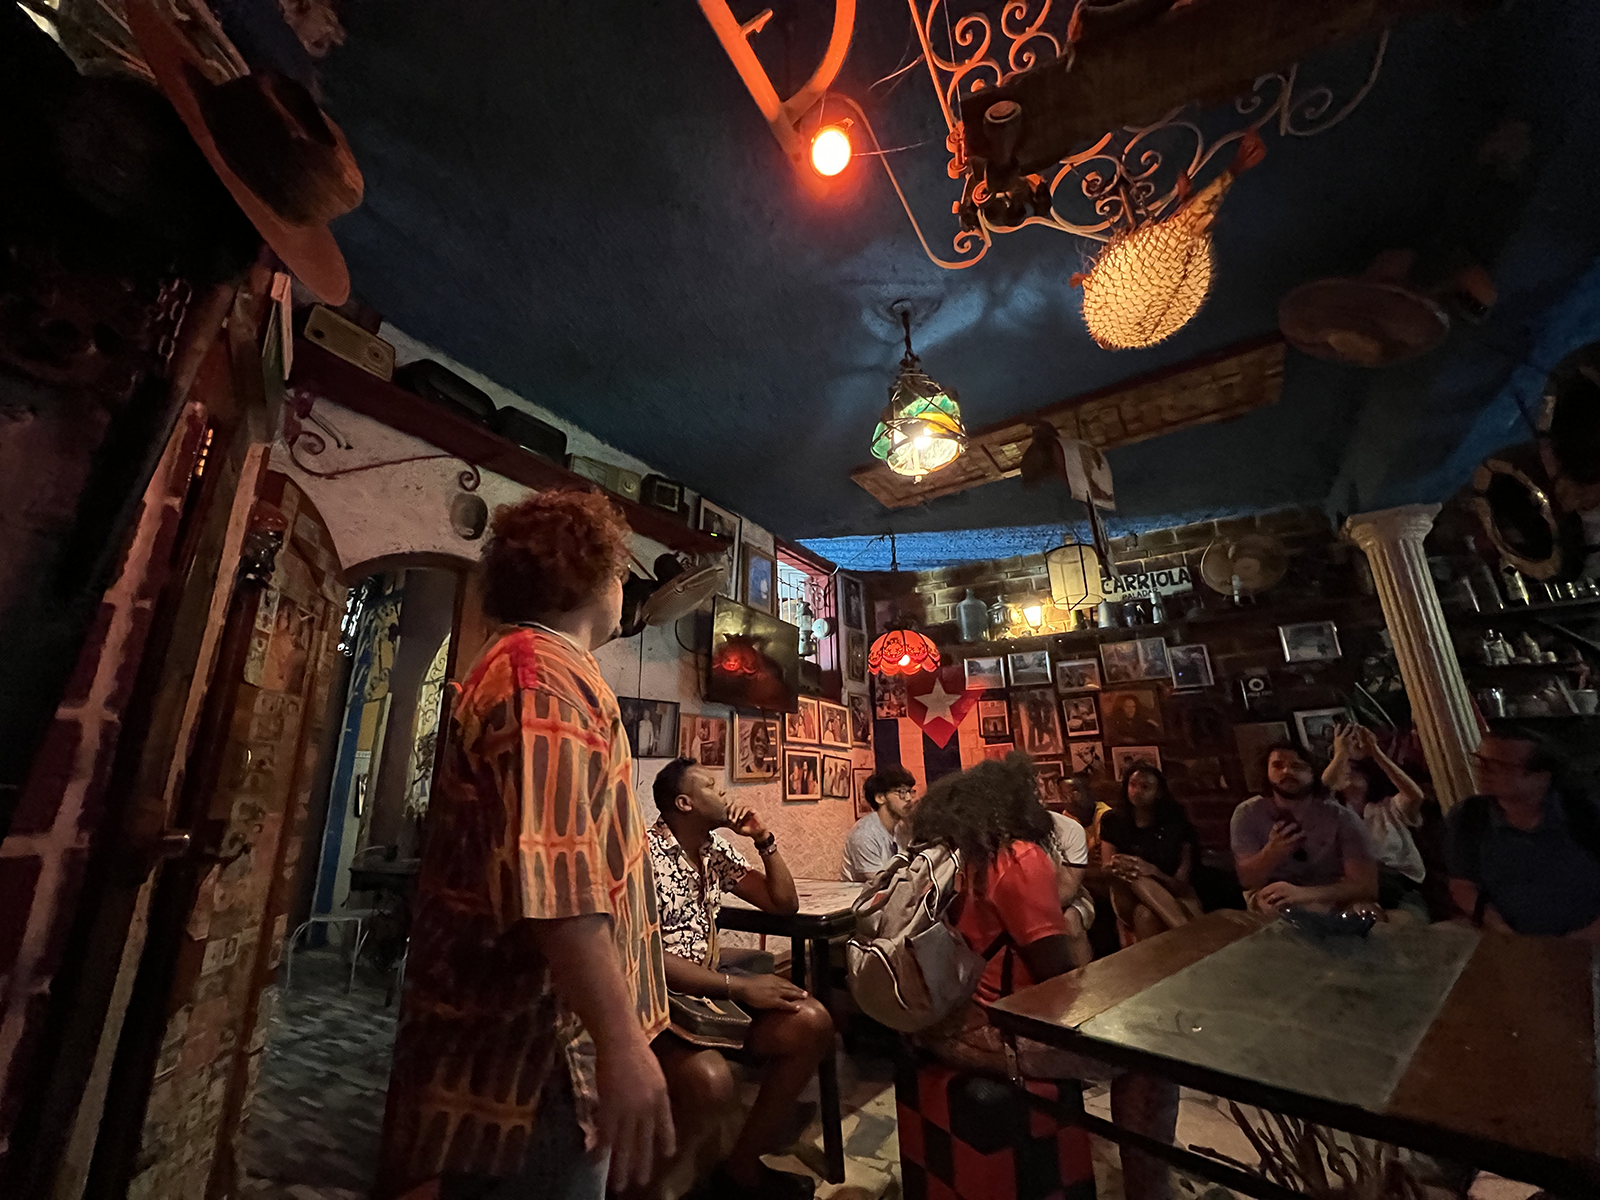 Interior of a Cuban bar filled in warm light and pictures hanging on the walls.